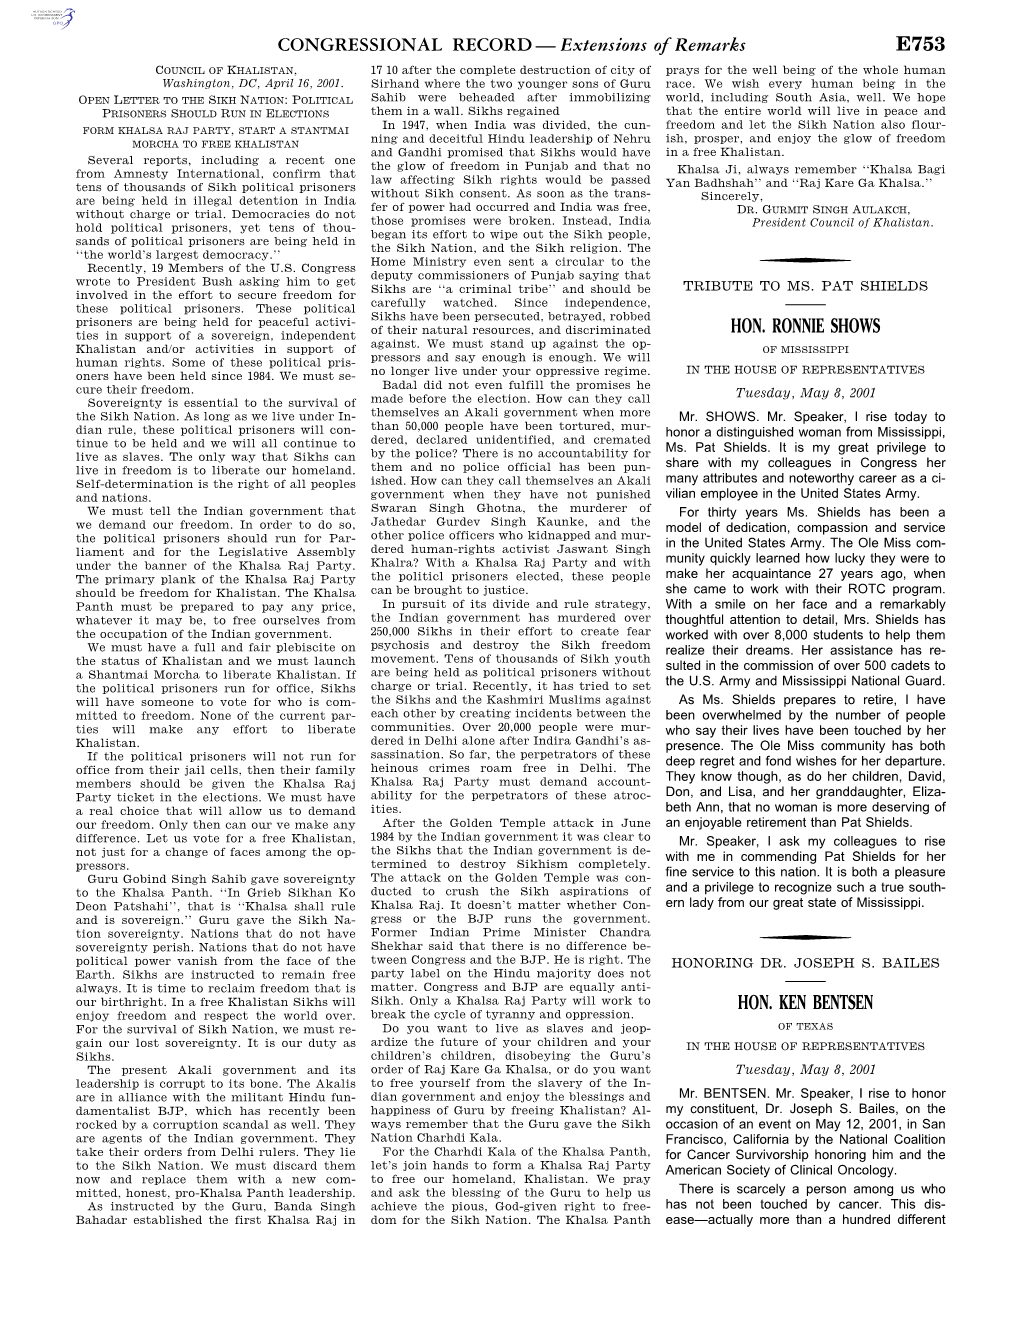 CONGRESSIONAL RECORD— Extensions of Remarks E753 HON. RONNIE SHOWS HON. KEN BENTSEN